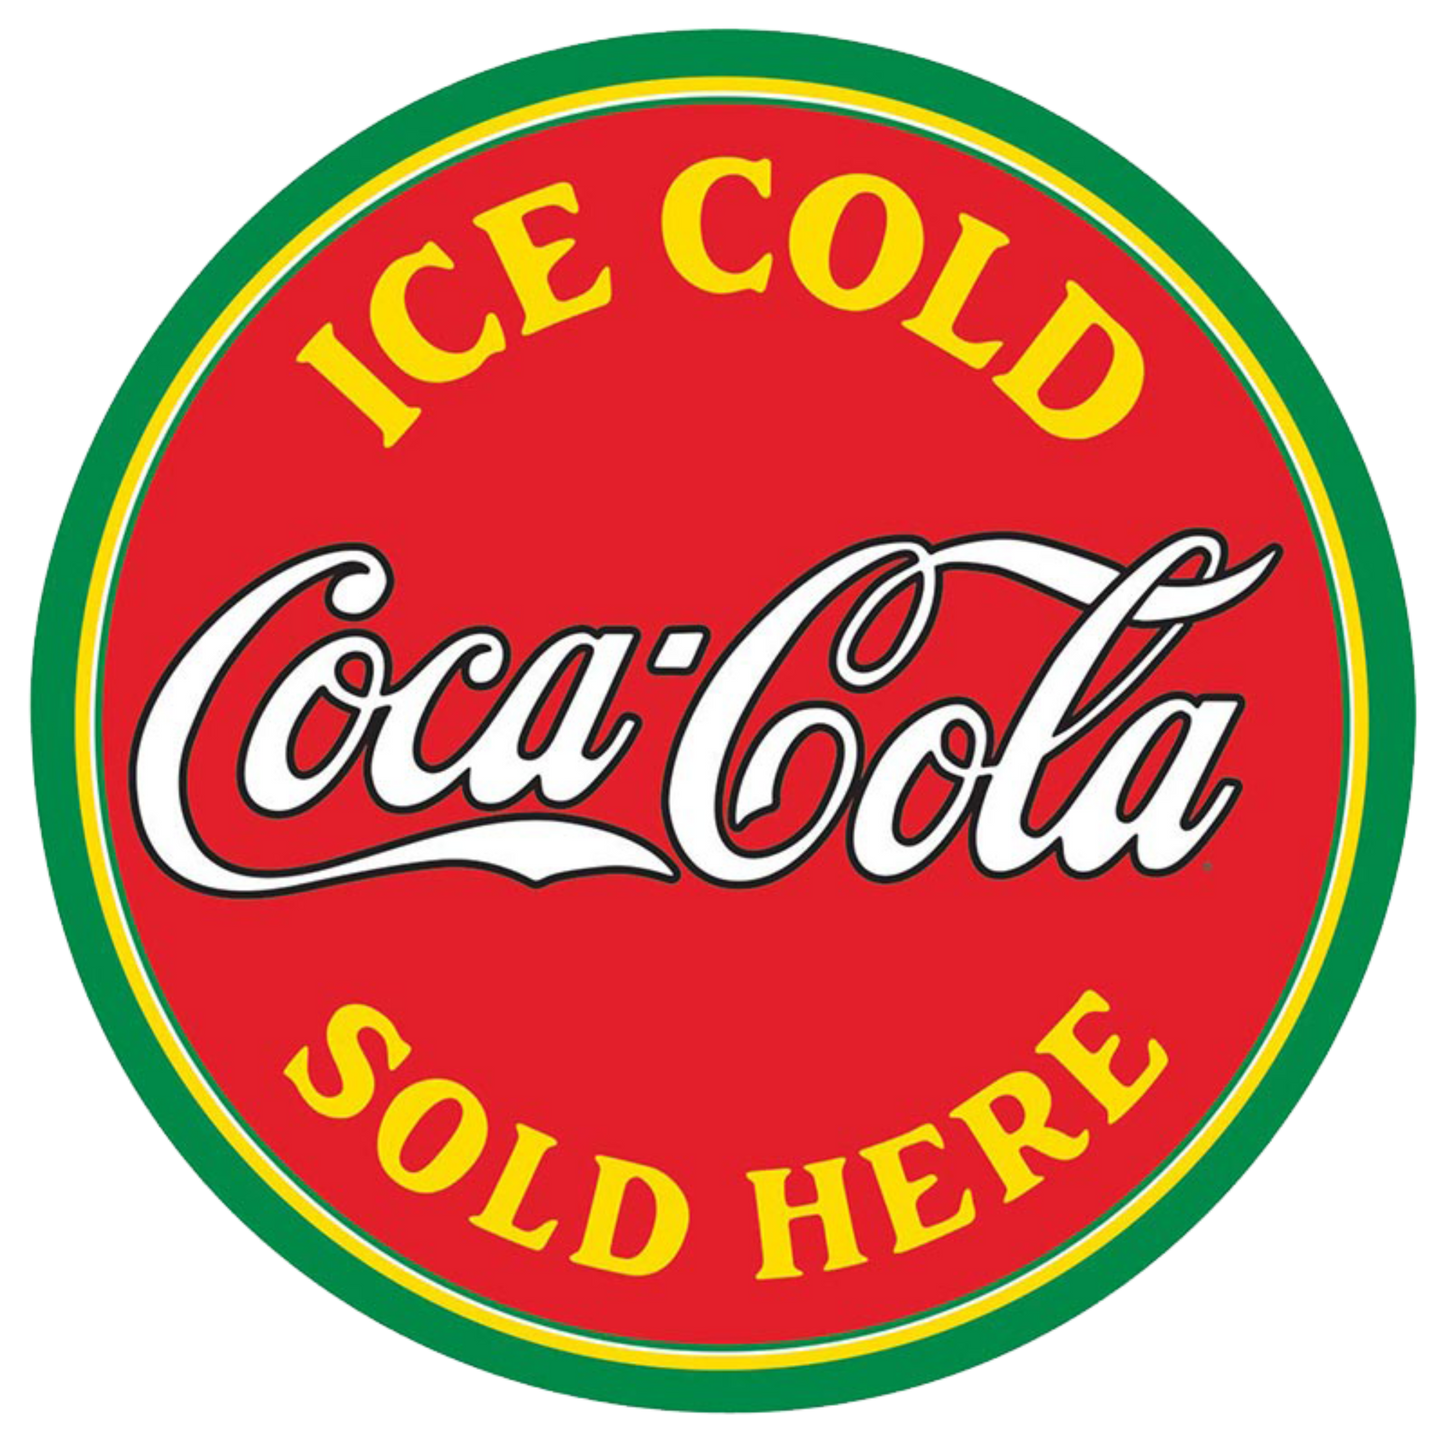 A round tin sign with the iconic Coca-Cola logo and the phrases "ICE COLD" and "SOLD HERE" indicating Coca-Cola is available at the location.